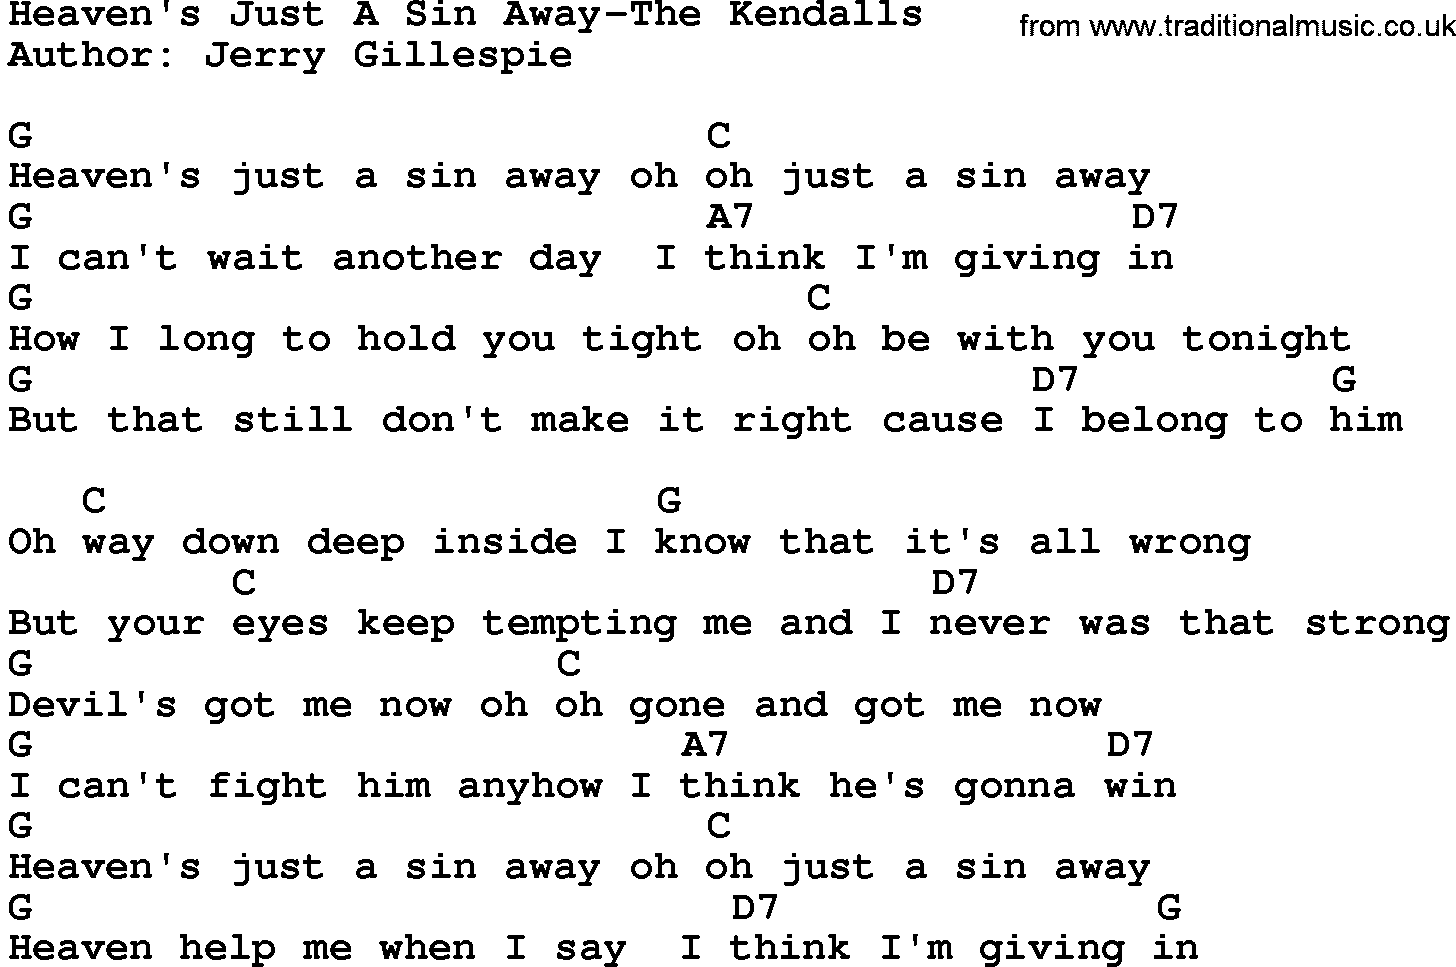 Country music song: Heaven's Just A Sin Away-The Kendalls lyrics and chords